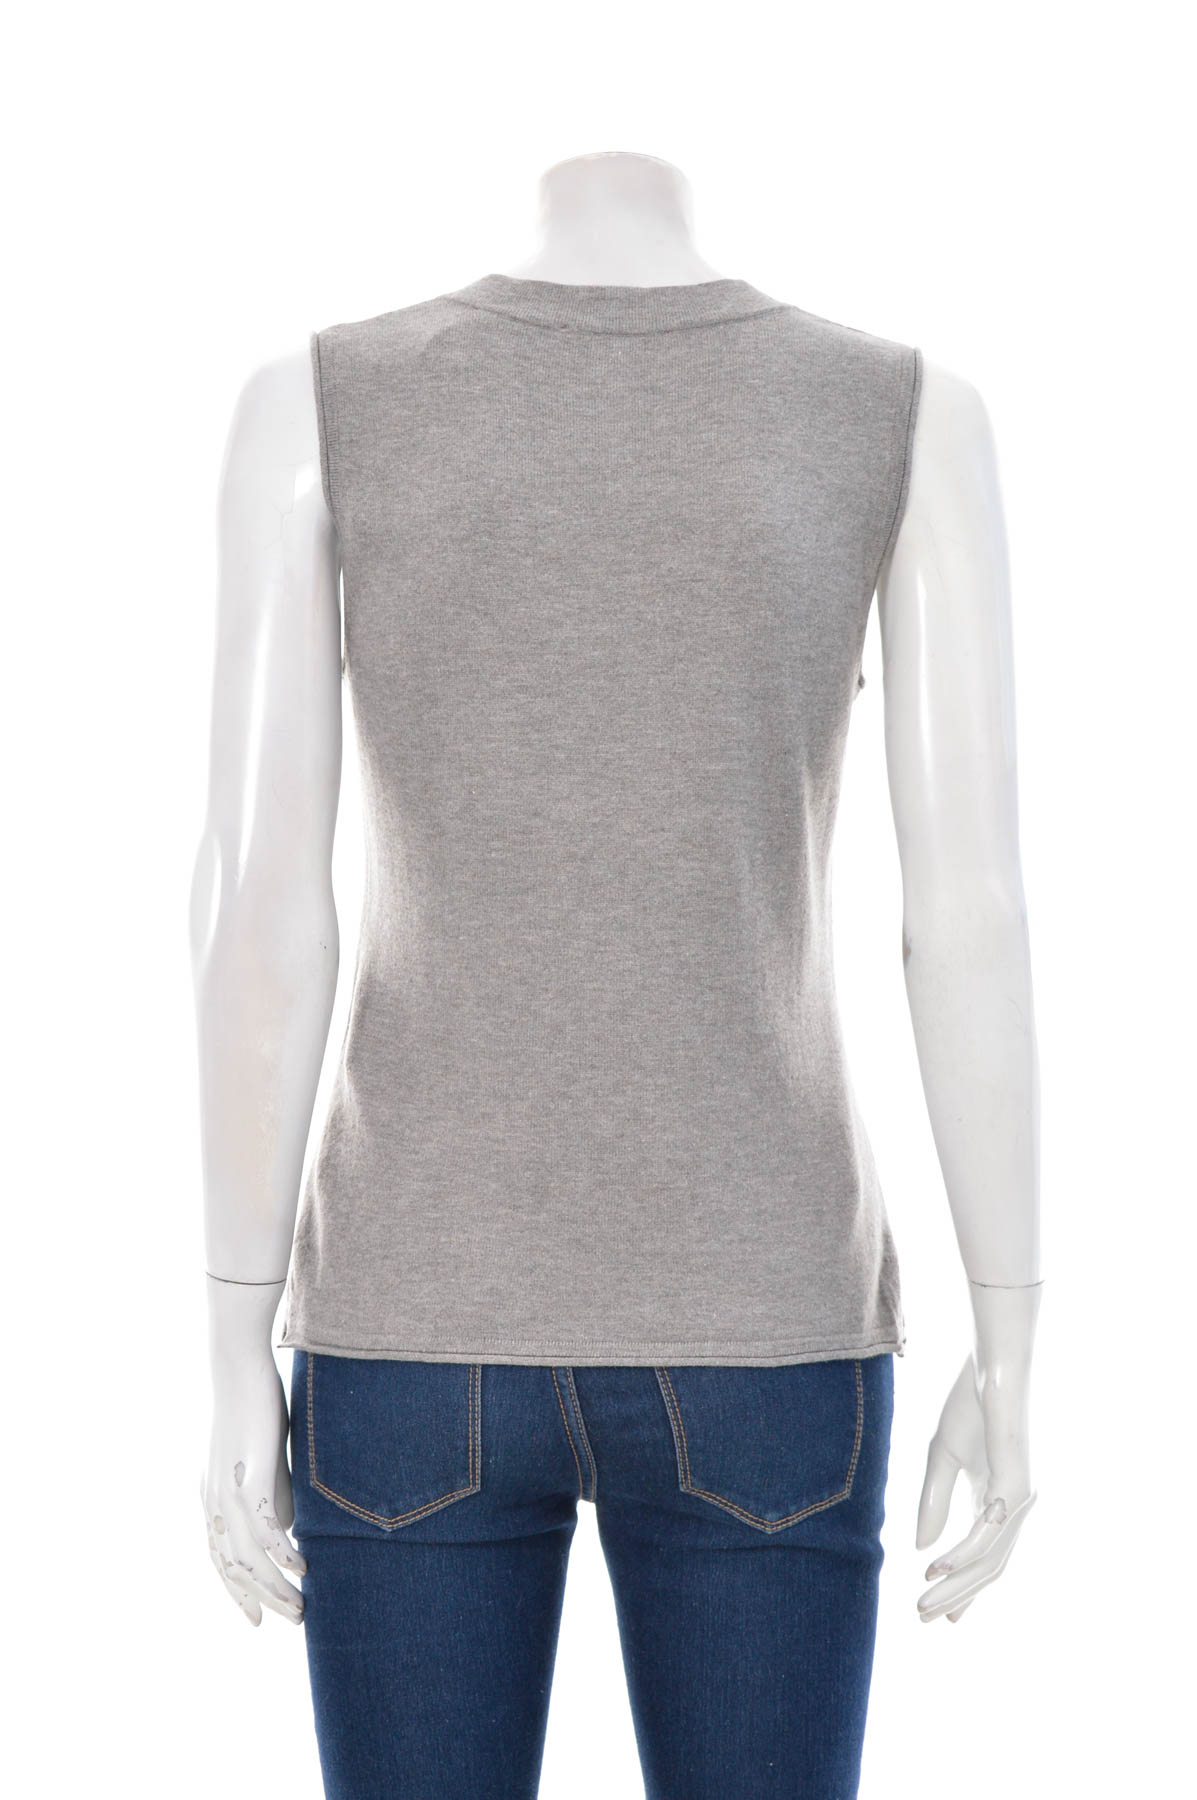 Women's sweater - S.Oliver - 1